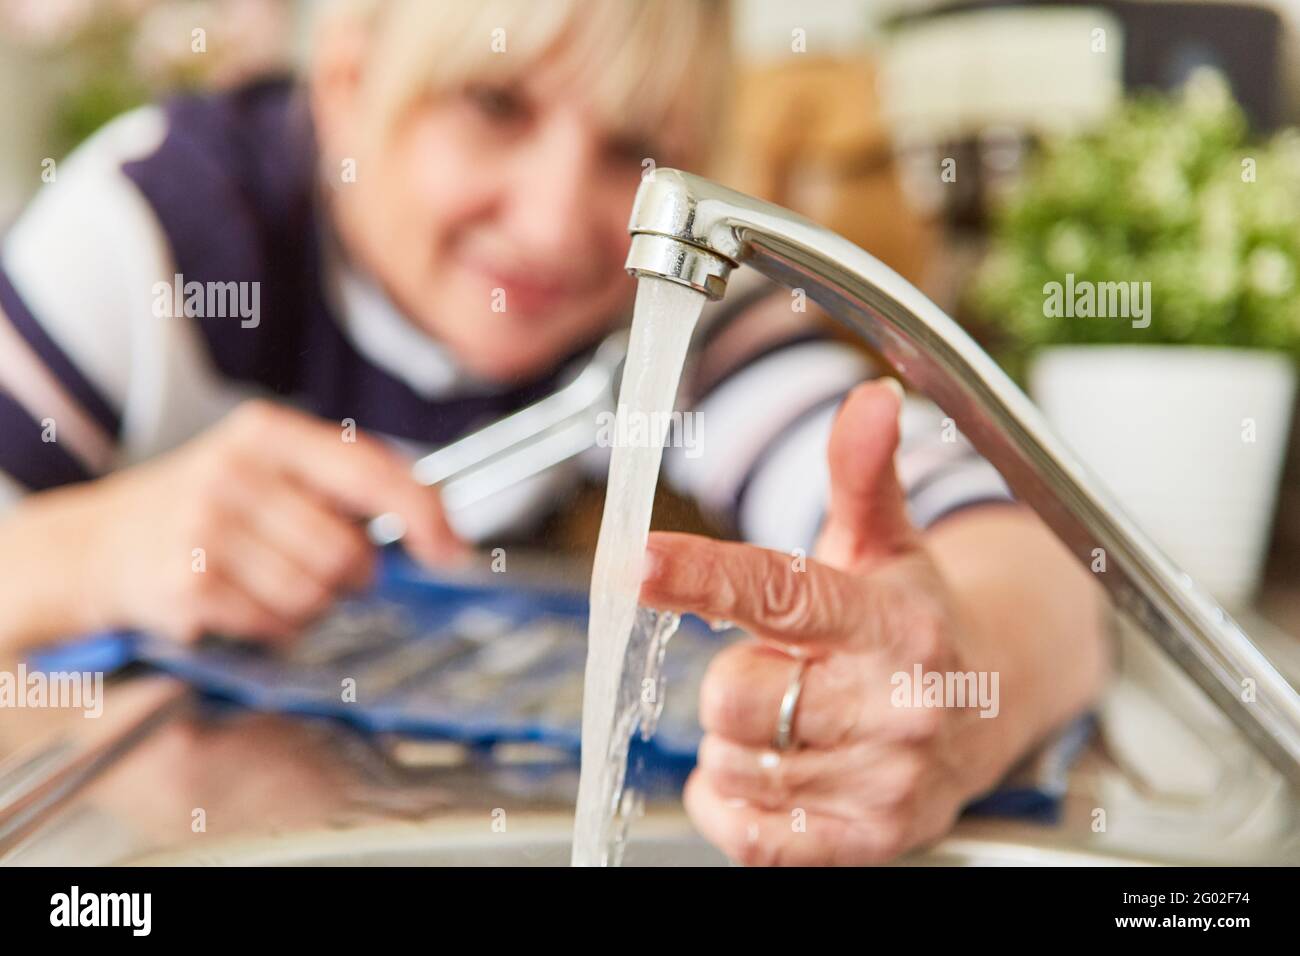 Woman working as a handyman checks the temperature of the hot water on the tap of the sink Stock Photo